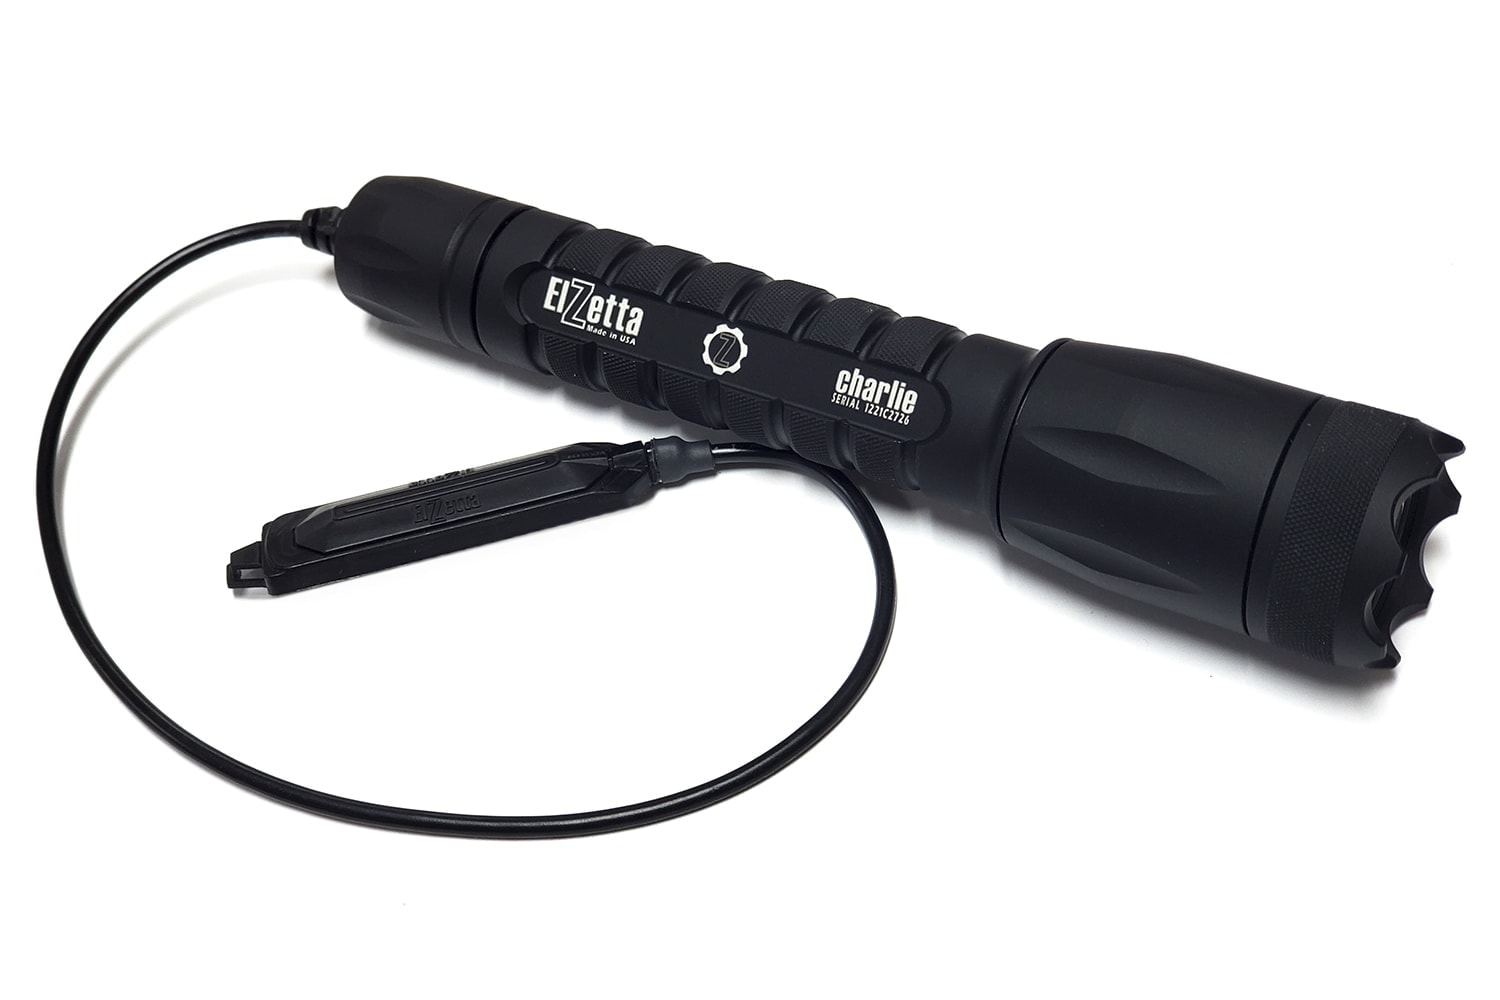 Charlie High Candela 3-Cell Flashlight with Crenelated Bezel and 12-inch Tape Switch